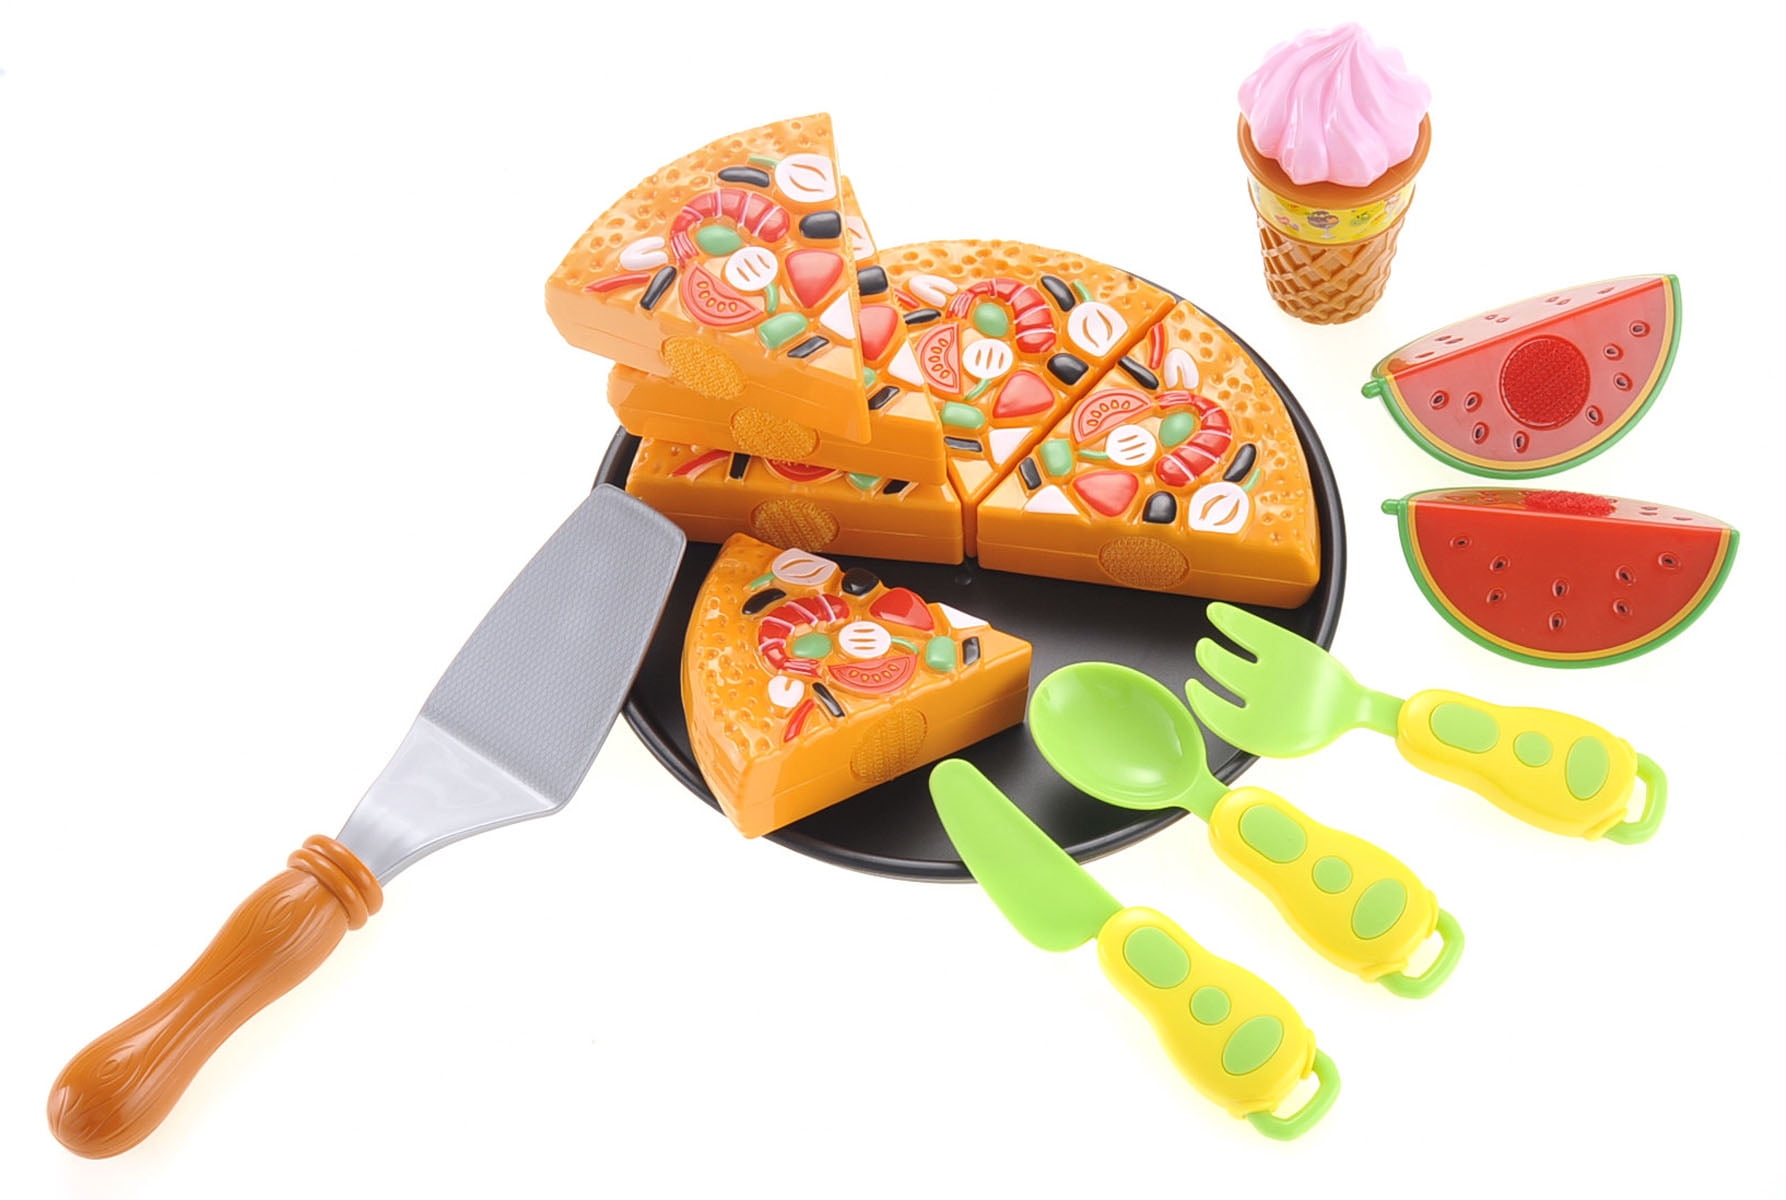 Details about   KITCHEN PLAY SET CUTTING PLAY FOOD PIZZA BREAD WATERMELON APPLE 